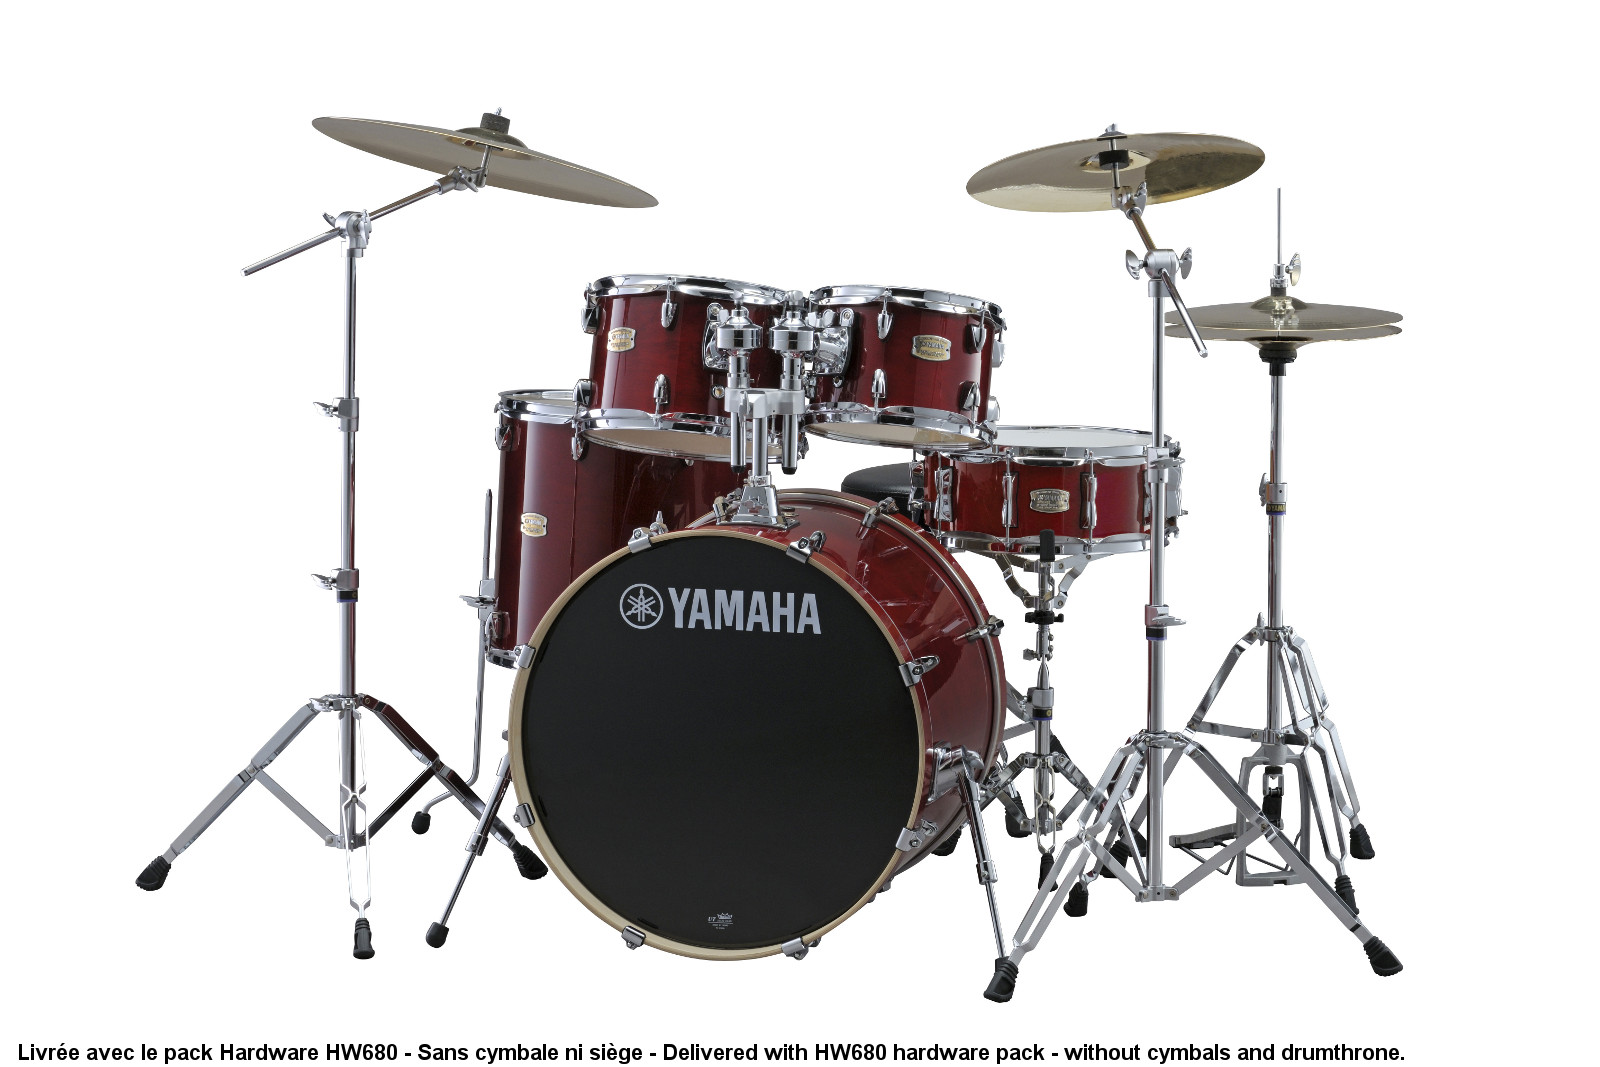 YAMAHA STAGE CUSTOM BIRCH FUSION 20 CRANBERRY RED + PACK HW680W